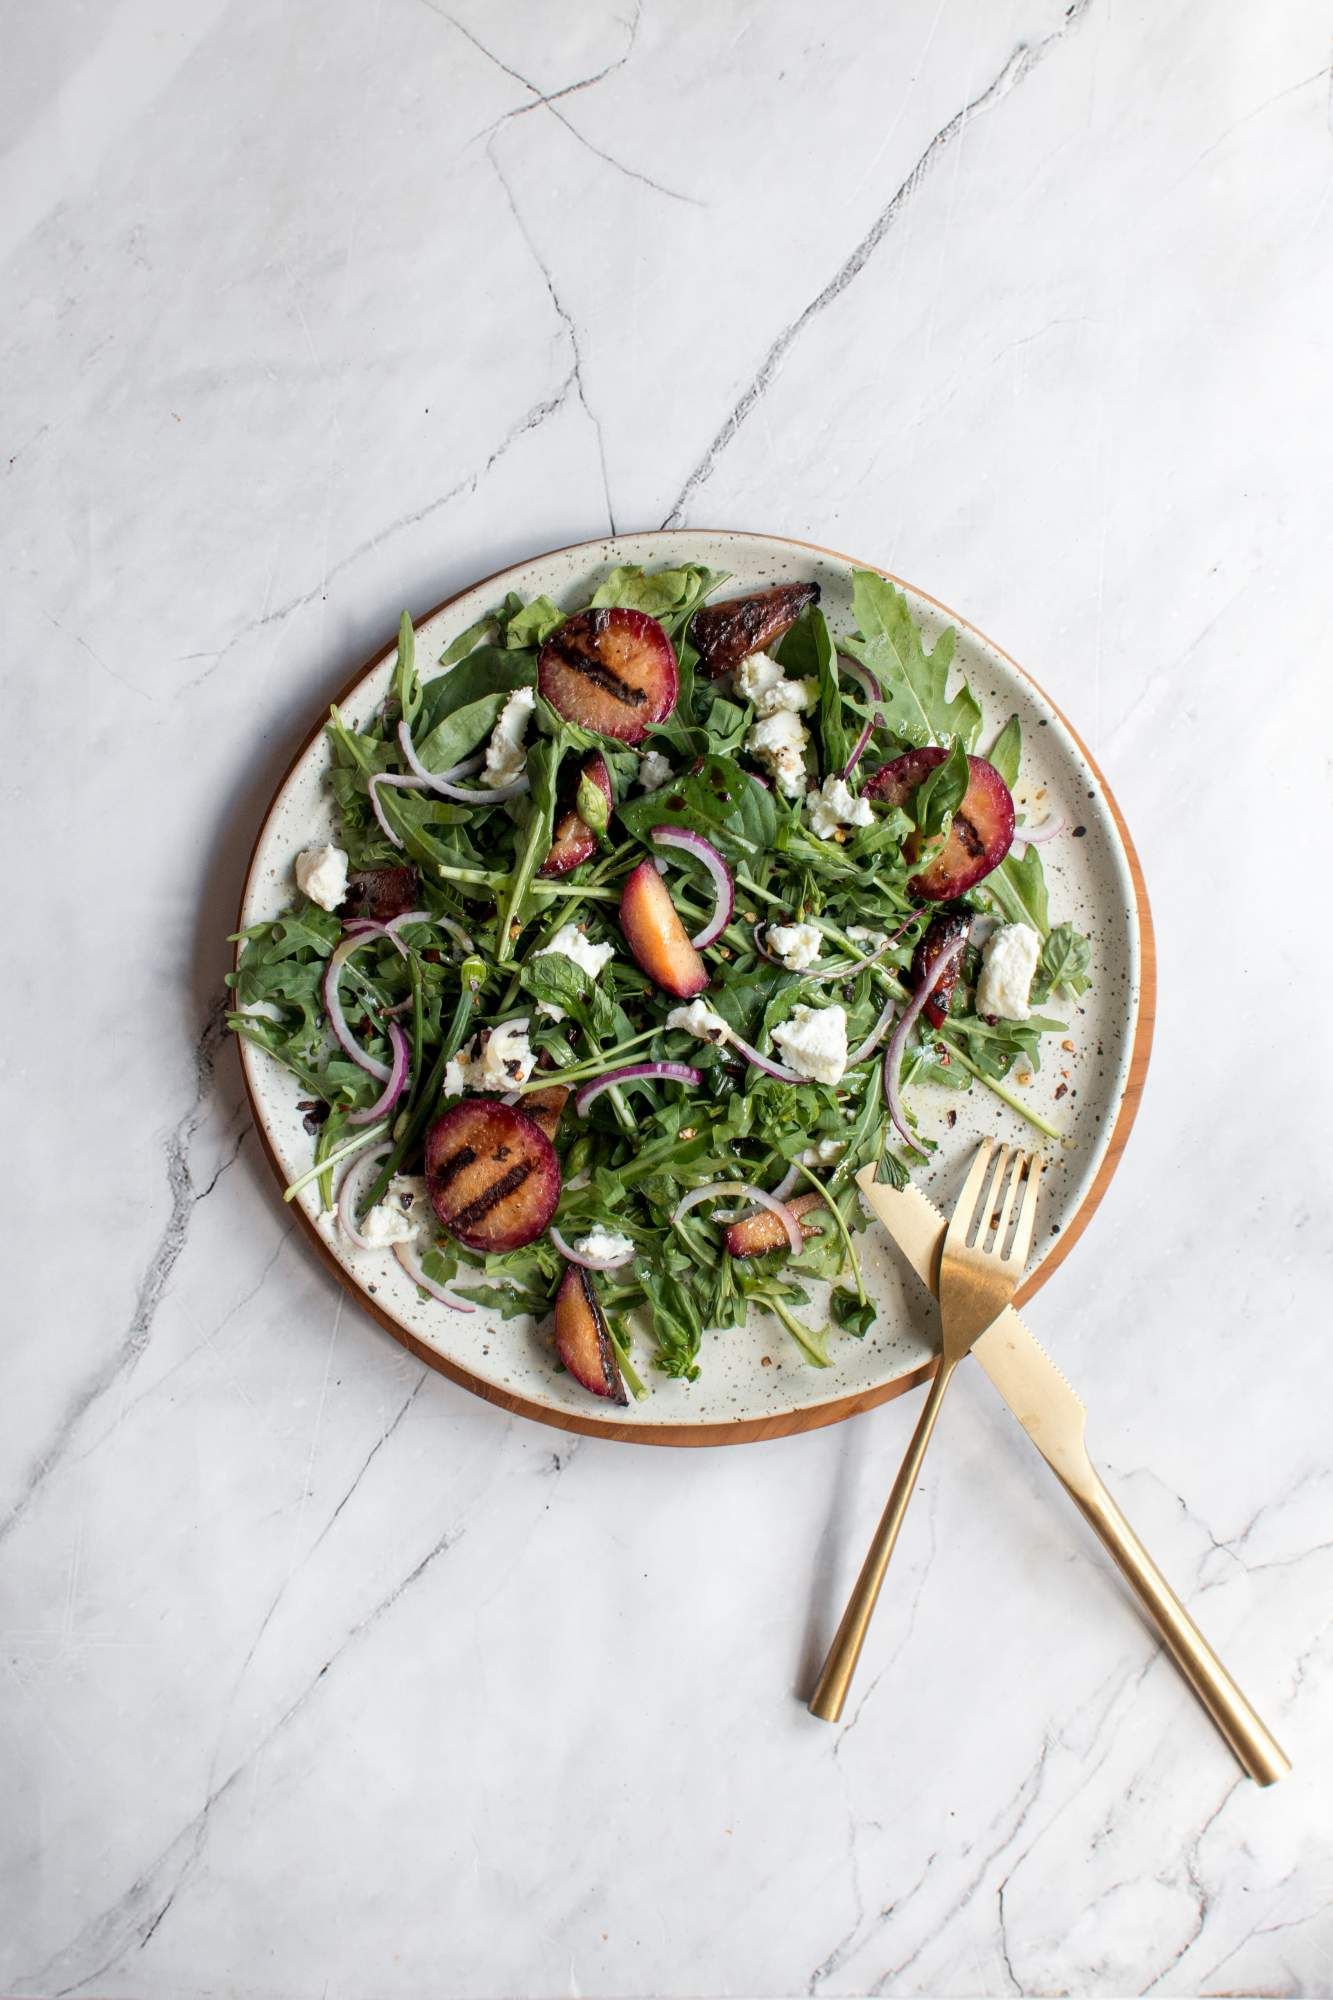 Plum salad with fresh arugula, grilled plums, basil, mint, red onions, goat cheese, and a honey dressing.